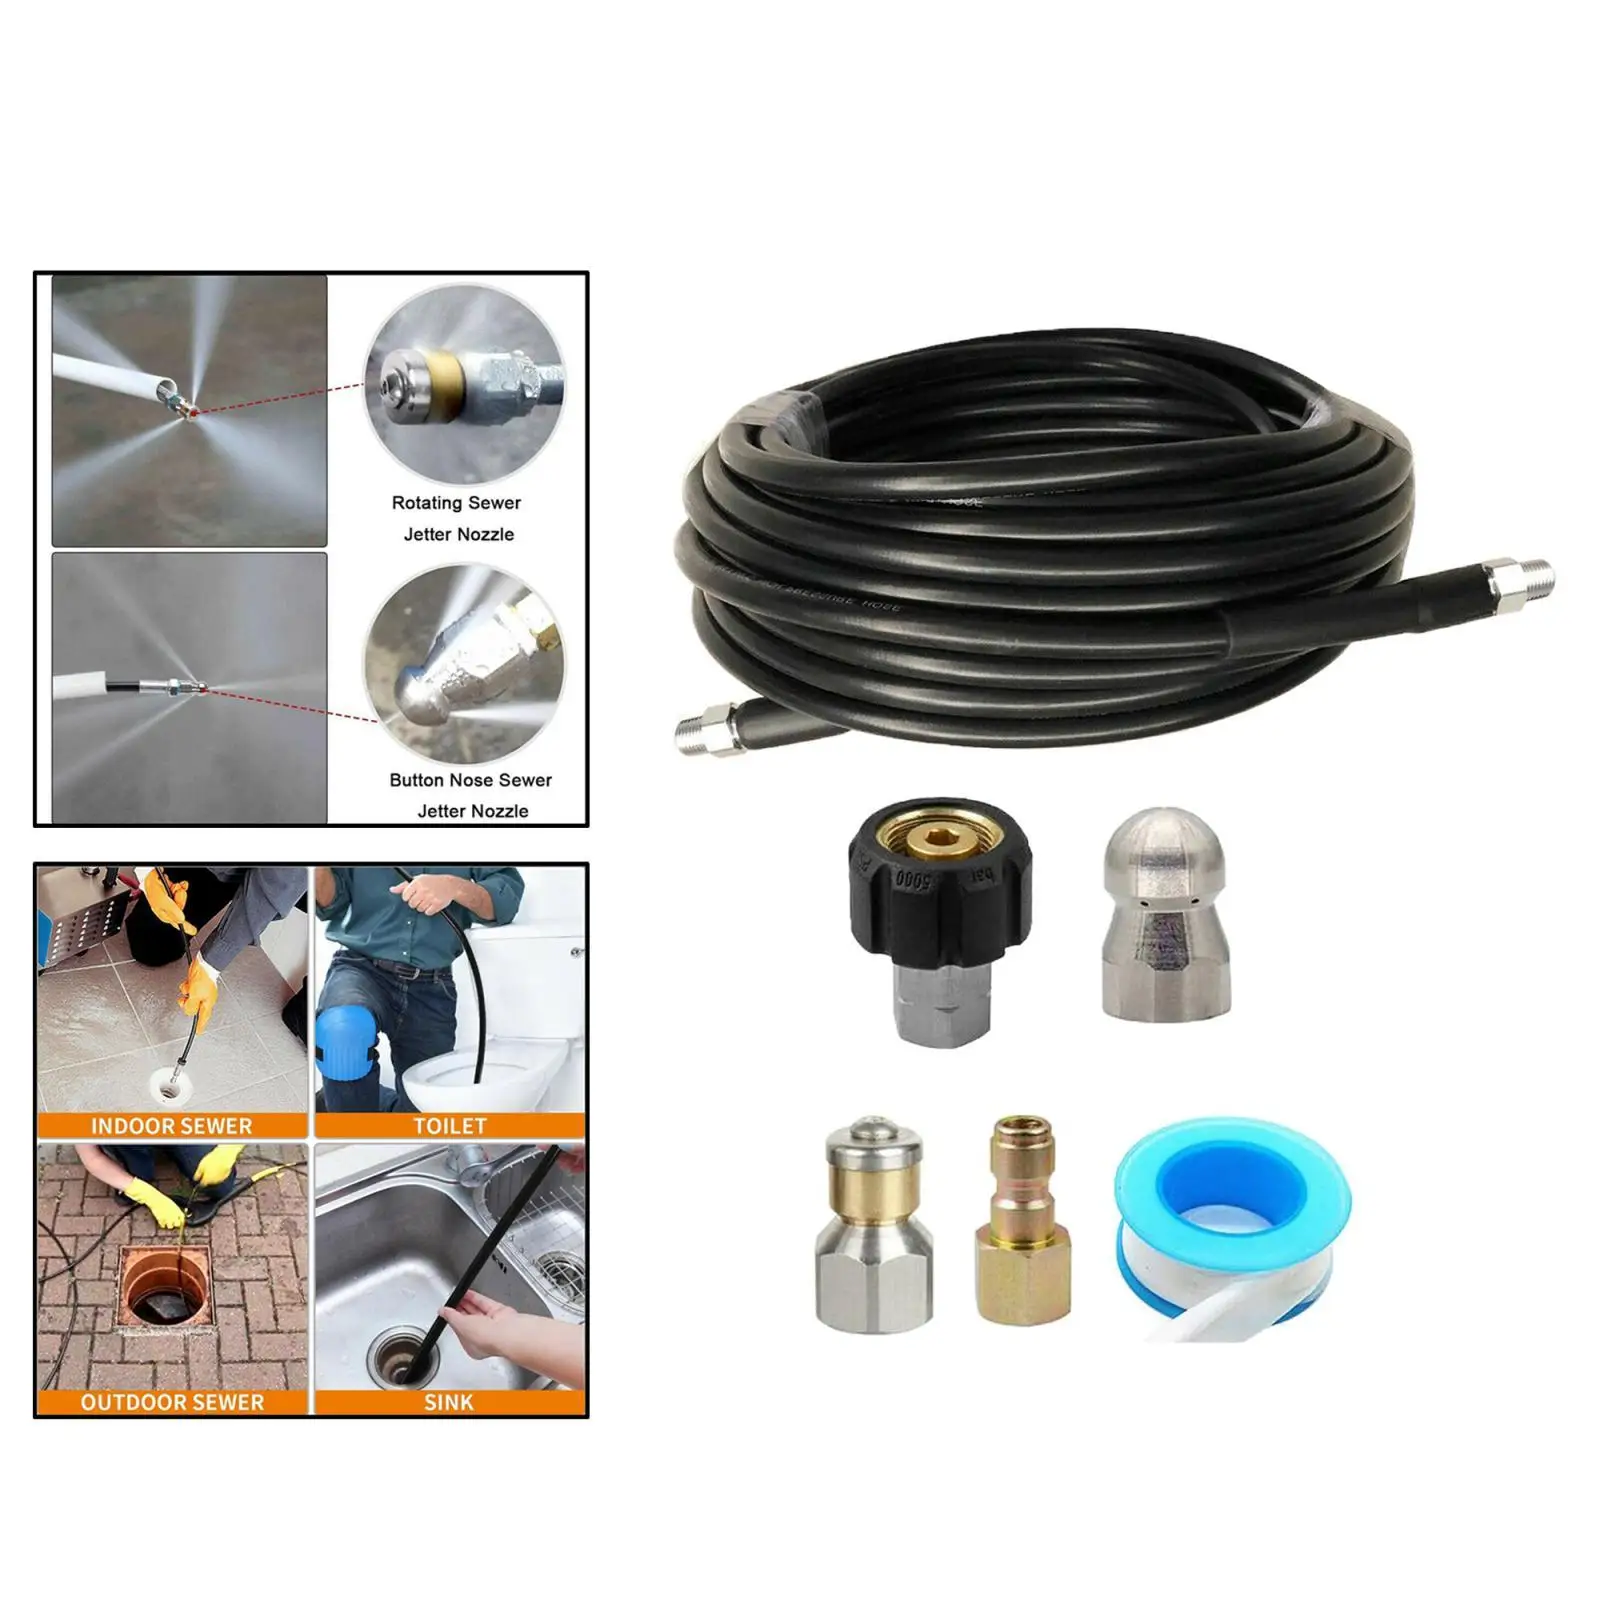 1x Sewer  for Pressure Washer 5800 PSI Drain Cleaning Hose,15